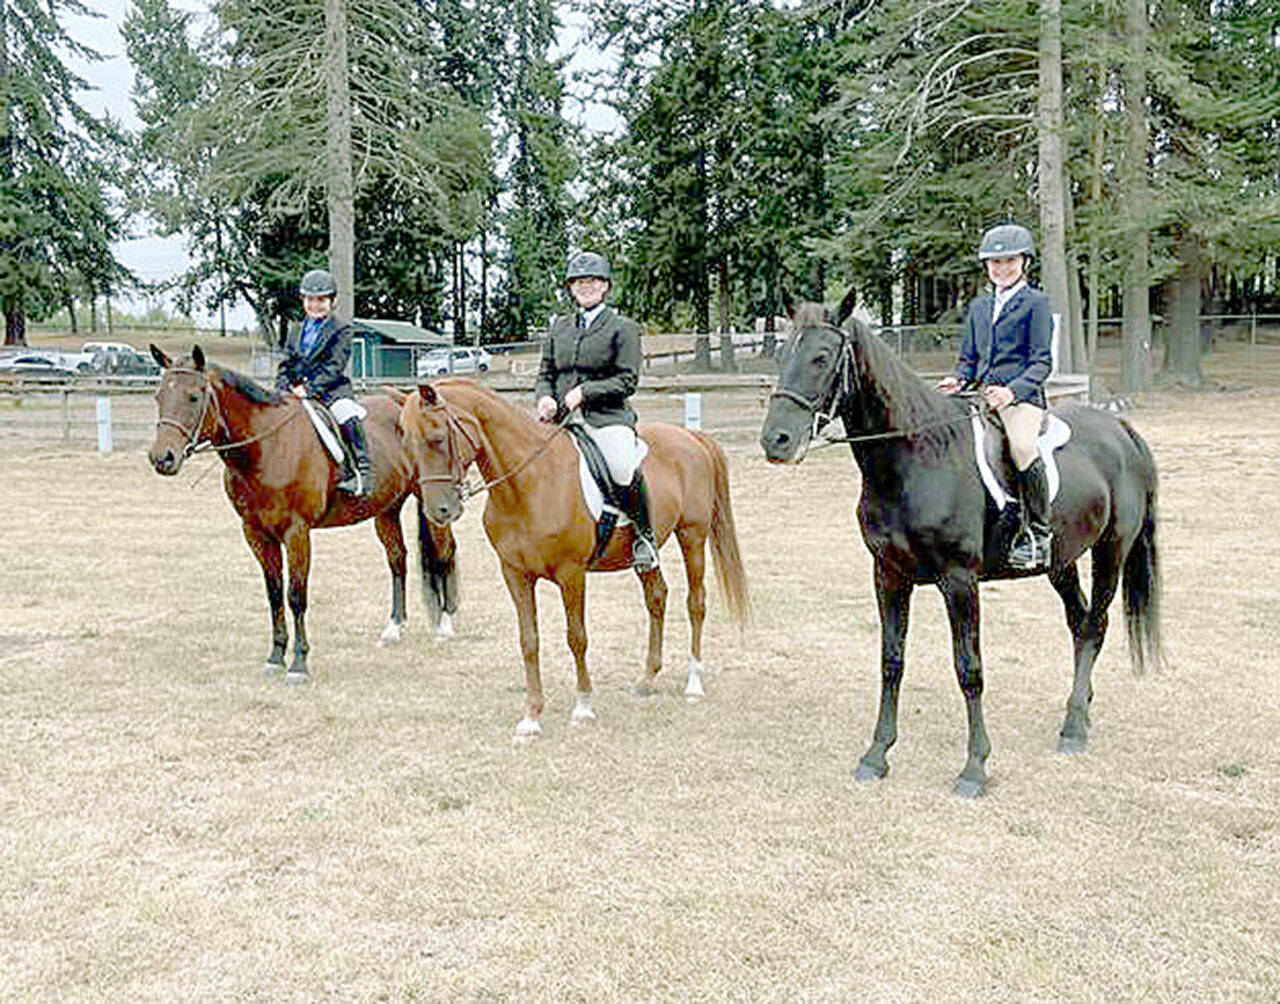 Lela Bankson, left, on Banjo, KK Pitts on Mikey and Lila Torey on Smokey are ready for the Hunt Seat class at the 4-H Horse Show at the Clallam County Fairgrounds. (Photo courtesy Katie Newton)